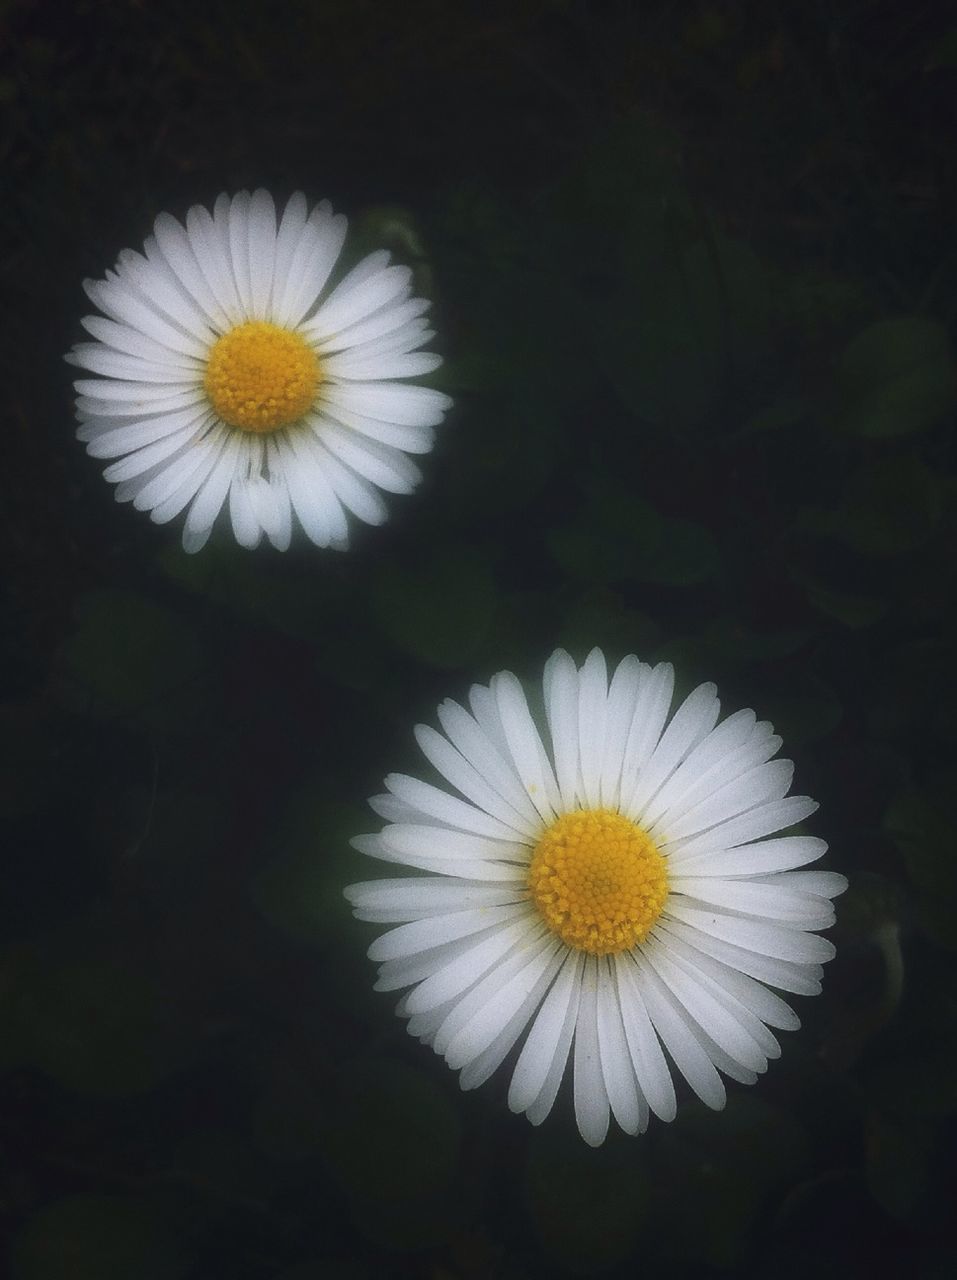 flower, freshness, fragility, flower head, petal, white color, daisy, beauty in nature, growth, close-up, nature, pollen, blooming, black background, plant, white, in bloom, night, blossom, focus on foreground